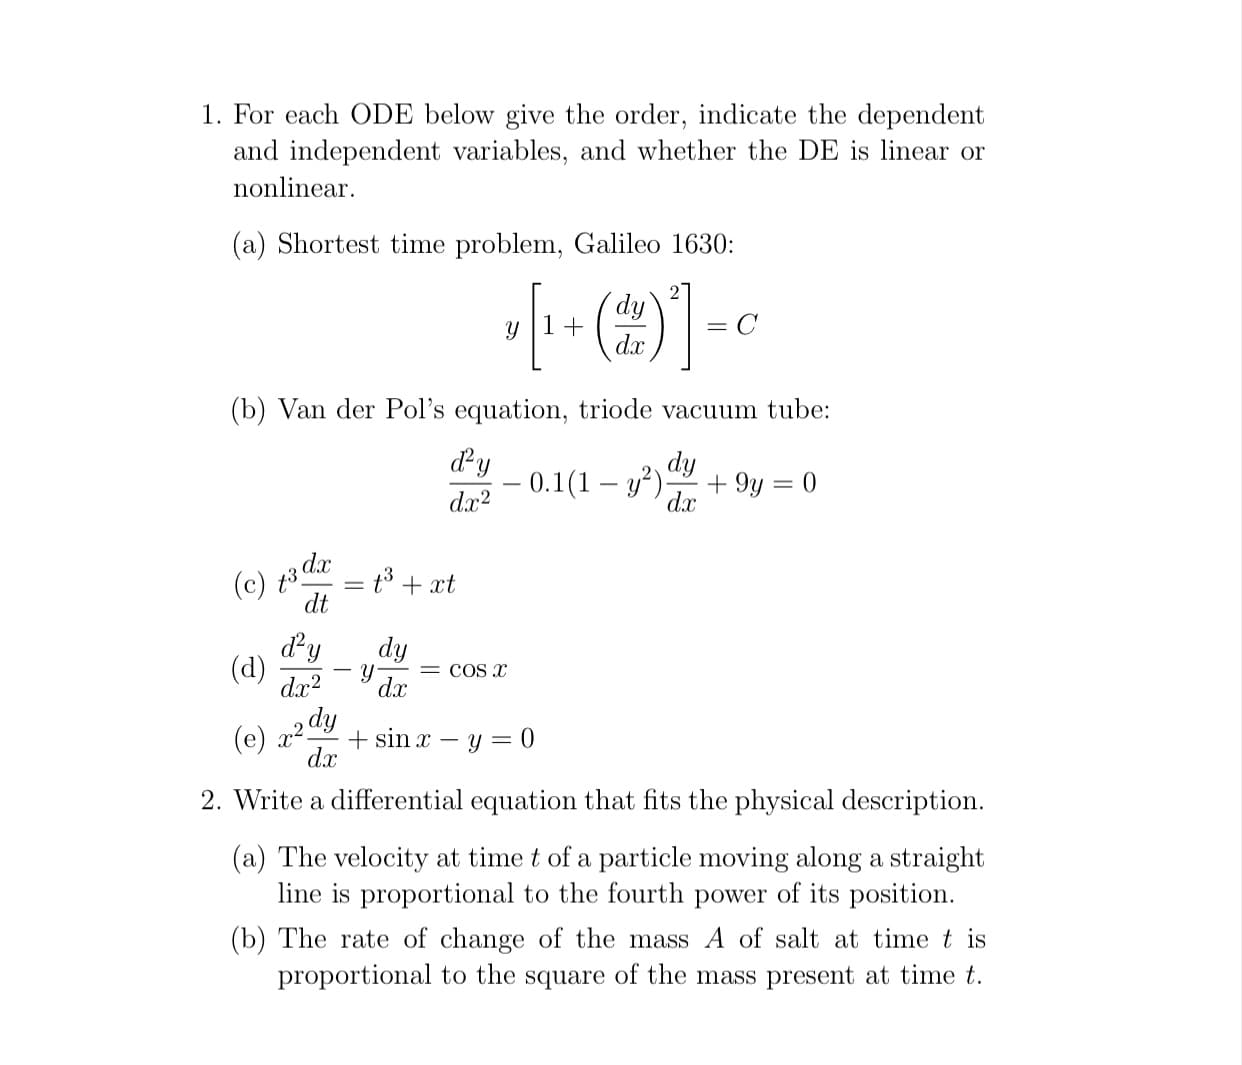 1. For each ODE below give the order, indicate the dependent
and independent variables, and whether the DE is linear or
nonlinear.
(a) Shortest time problem, Galileo 1630:
2
dy
y |1+
dr
= C
(b) Van der Pol's equation, triode vacuum tube:
dy
– 0.1(1 – y²).
dy
+ 9y = 0
d.x
%3D
|
dx?
(e) 3 dar = t3 + xt
dt
dy
(d)
dx?
dy
= COS x
-
dx
dy
(e)
+ sin x – y = 0
dx
